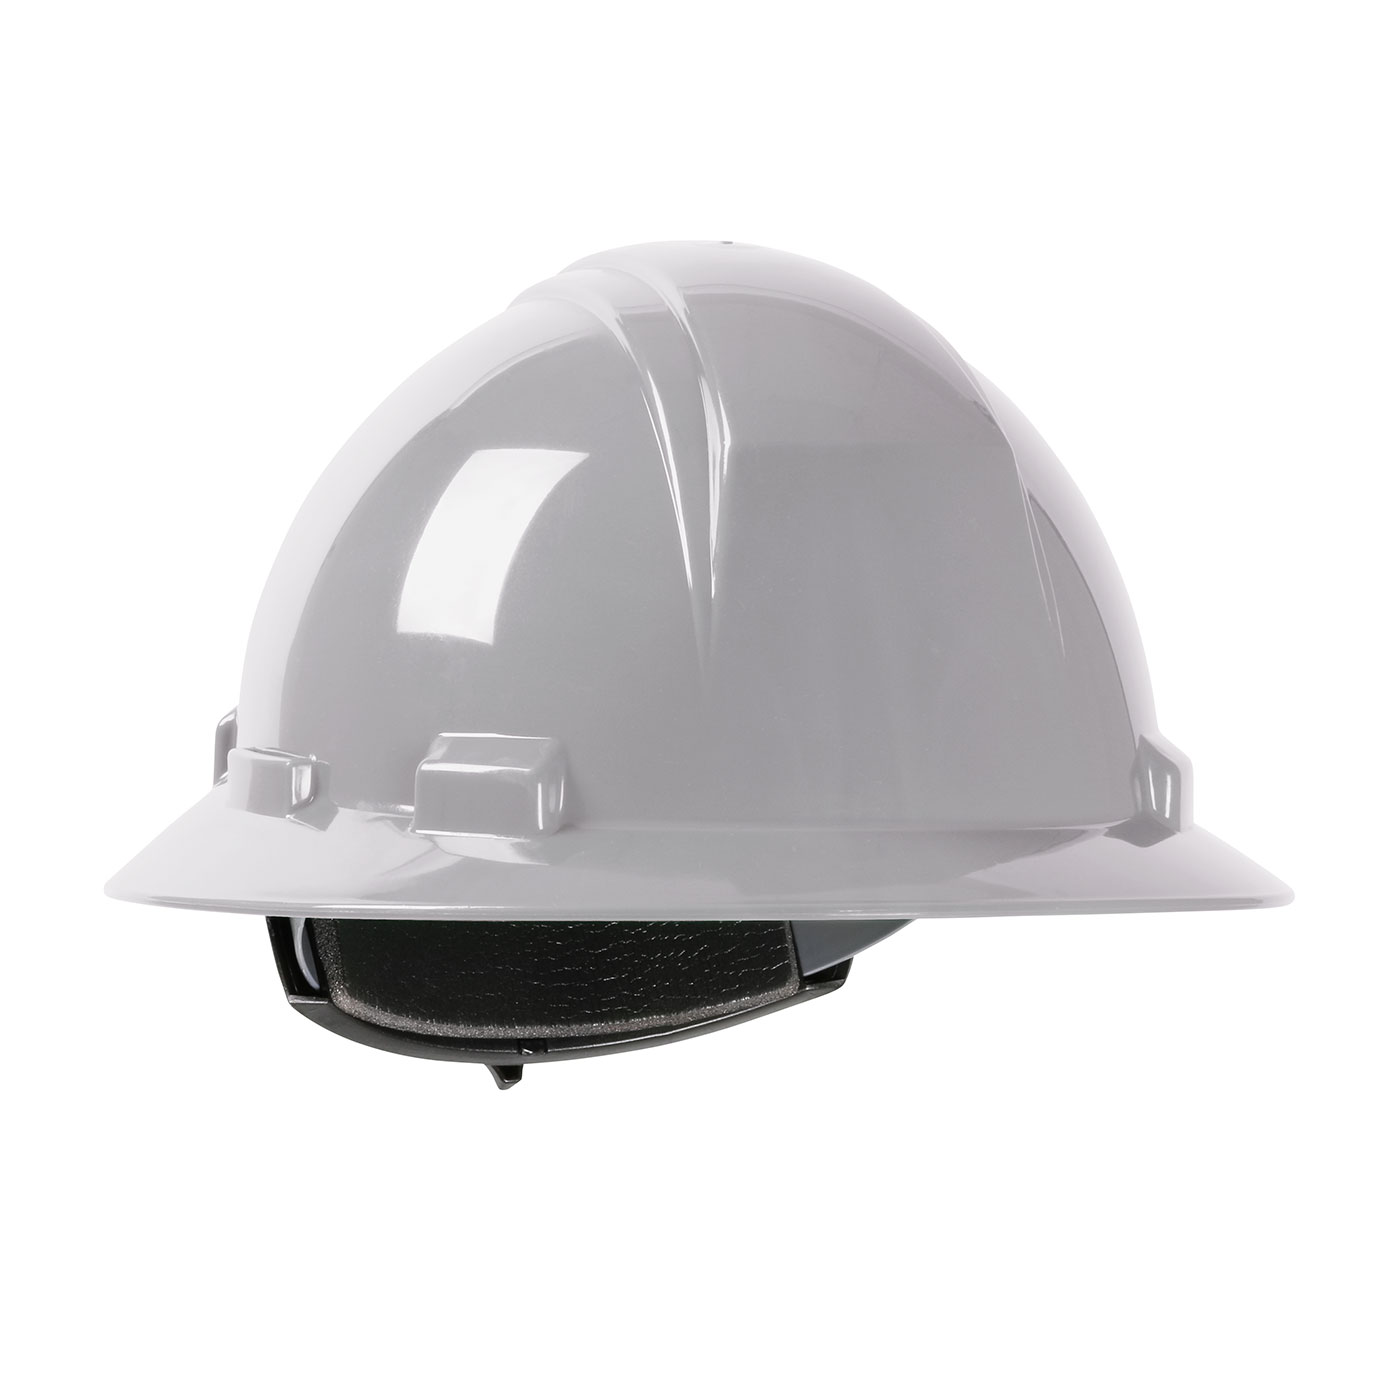 280-HP261R PIP® Dynamic Kilimanjaro™ Full Brim Hard Hat with HDPE Shell, 4-Point Textile Suspension and Wheel Ratchet Adjustment  - Gray